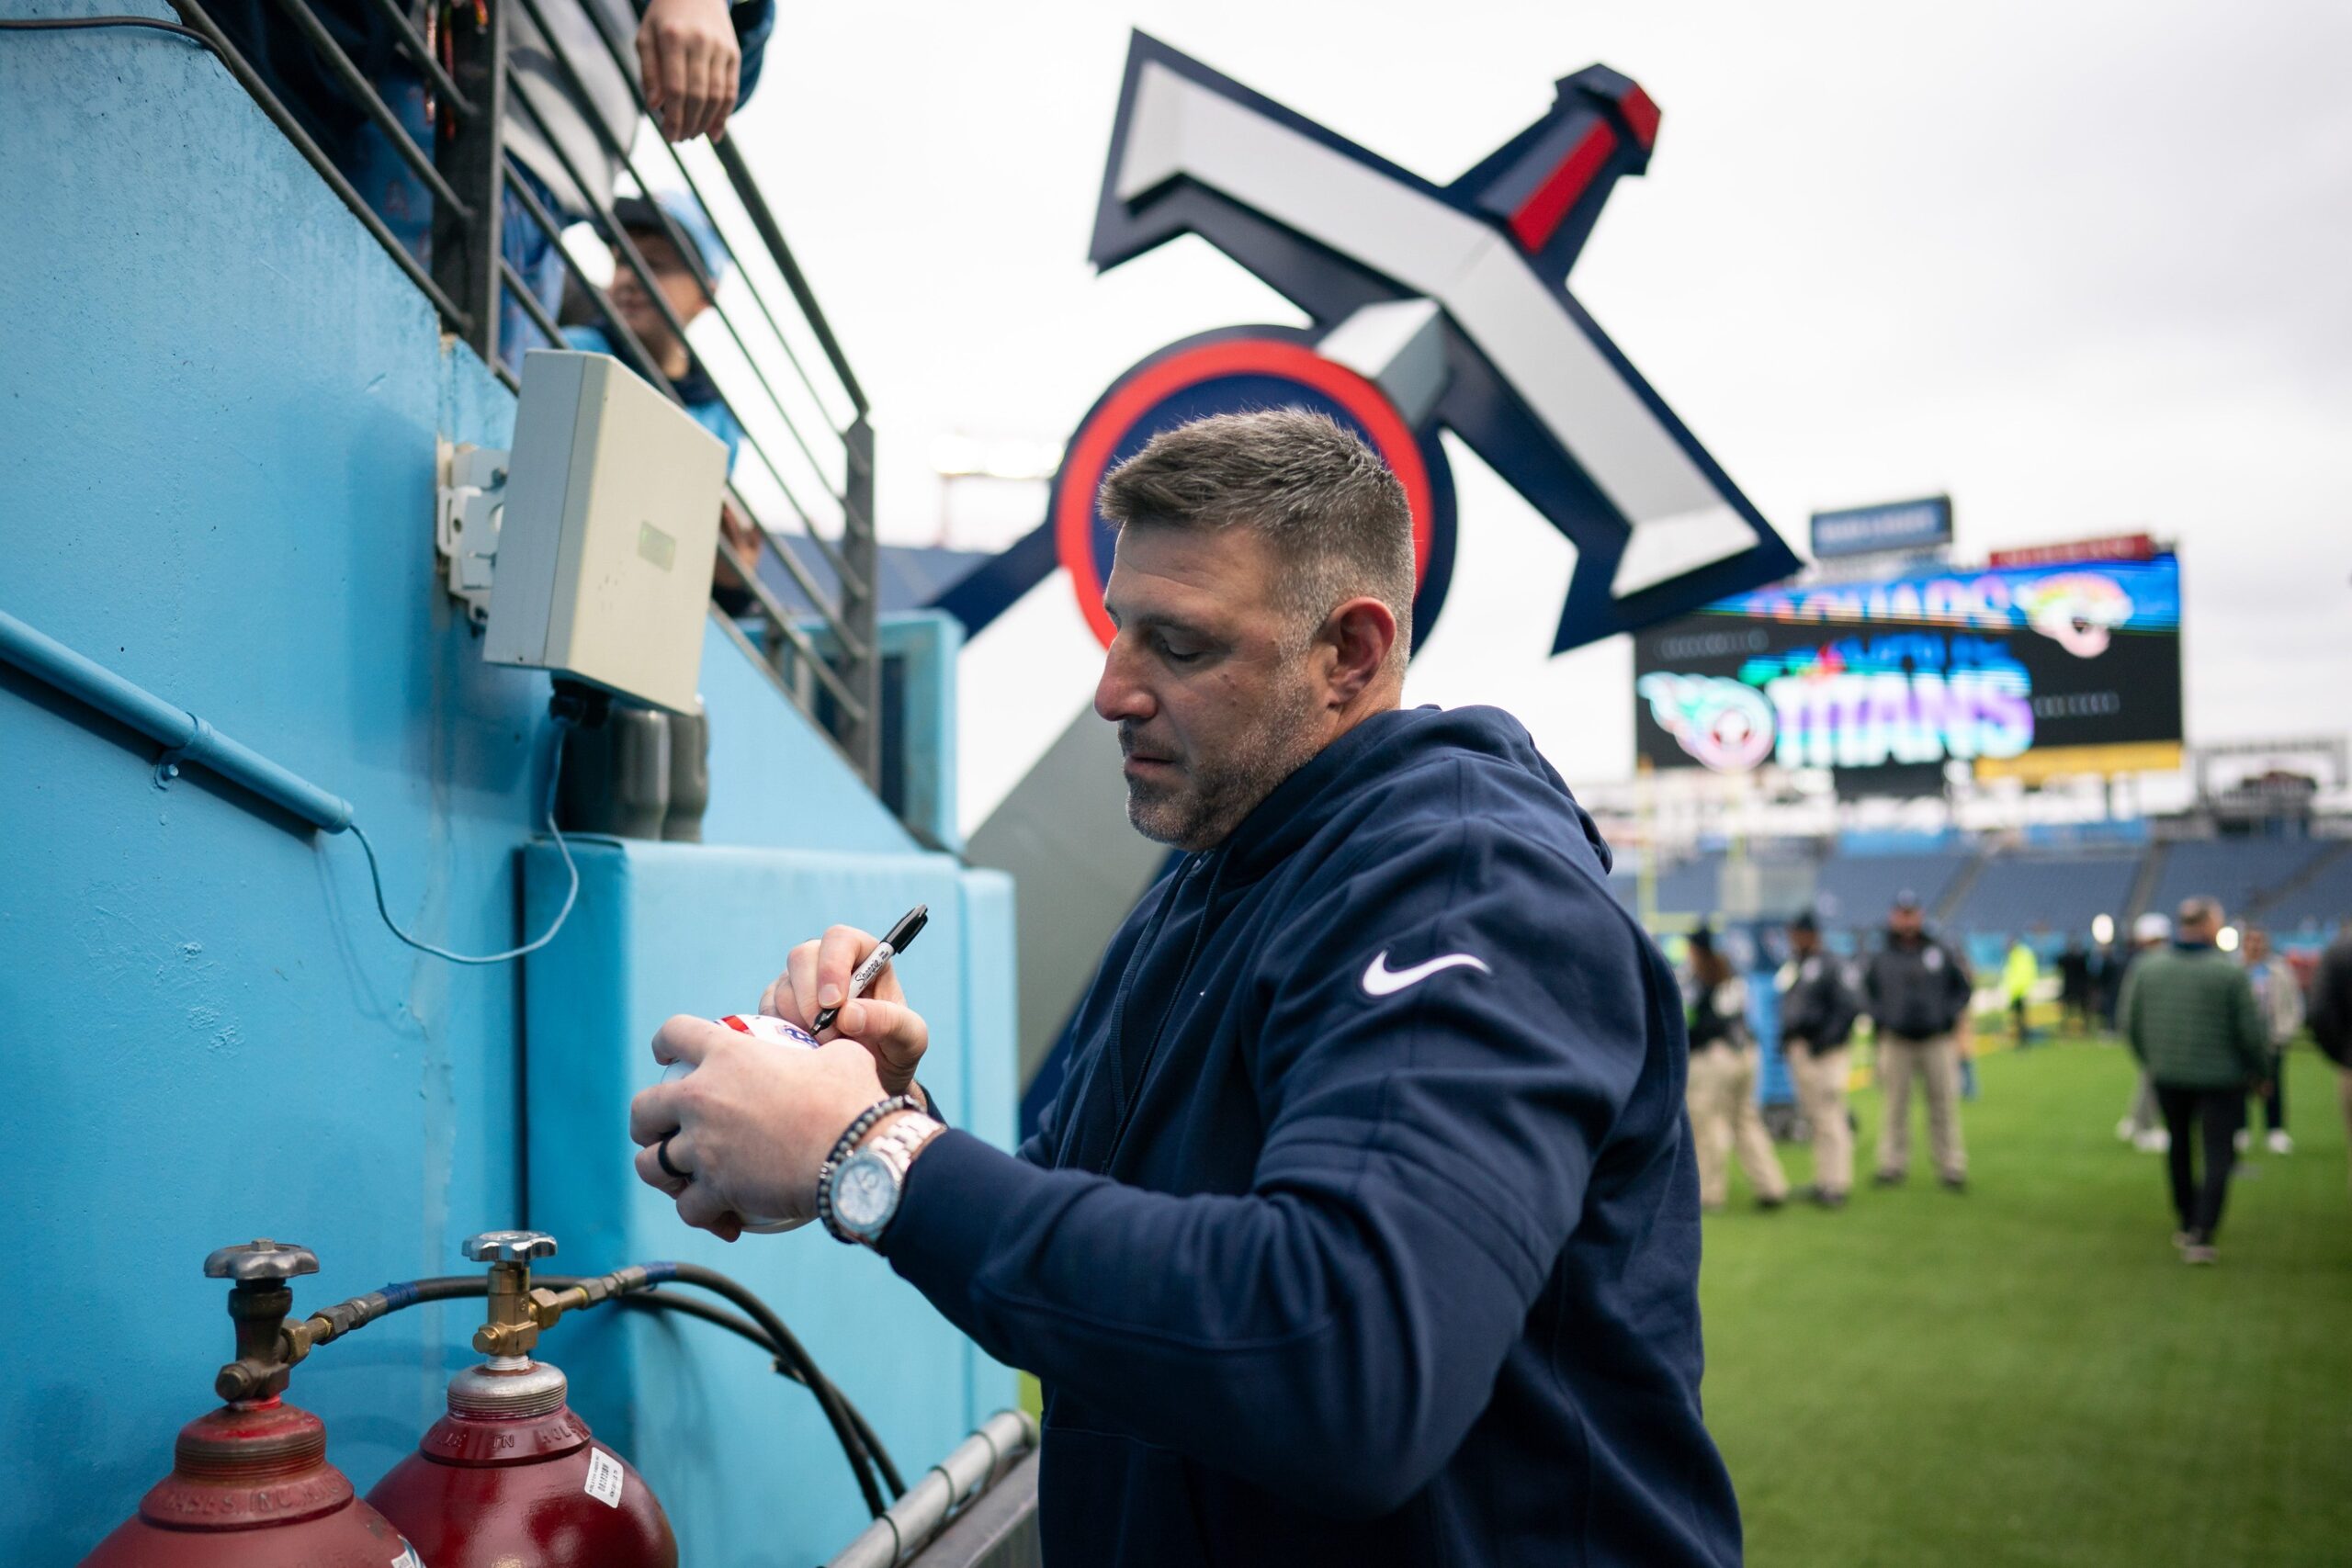 49ers may hire vrabel